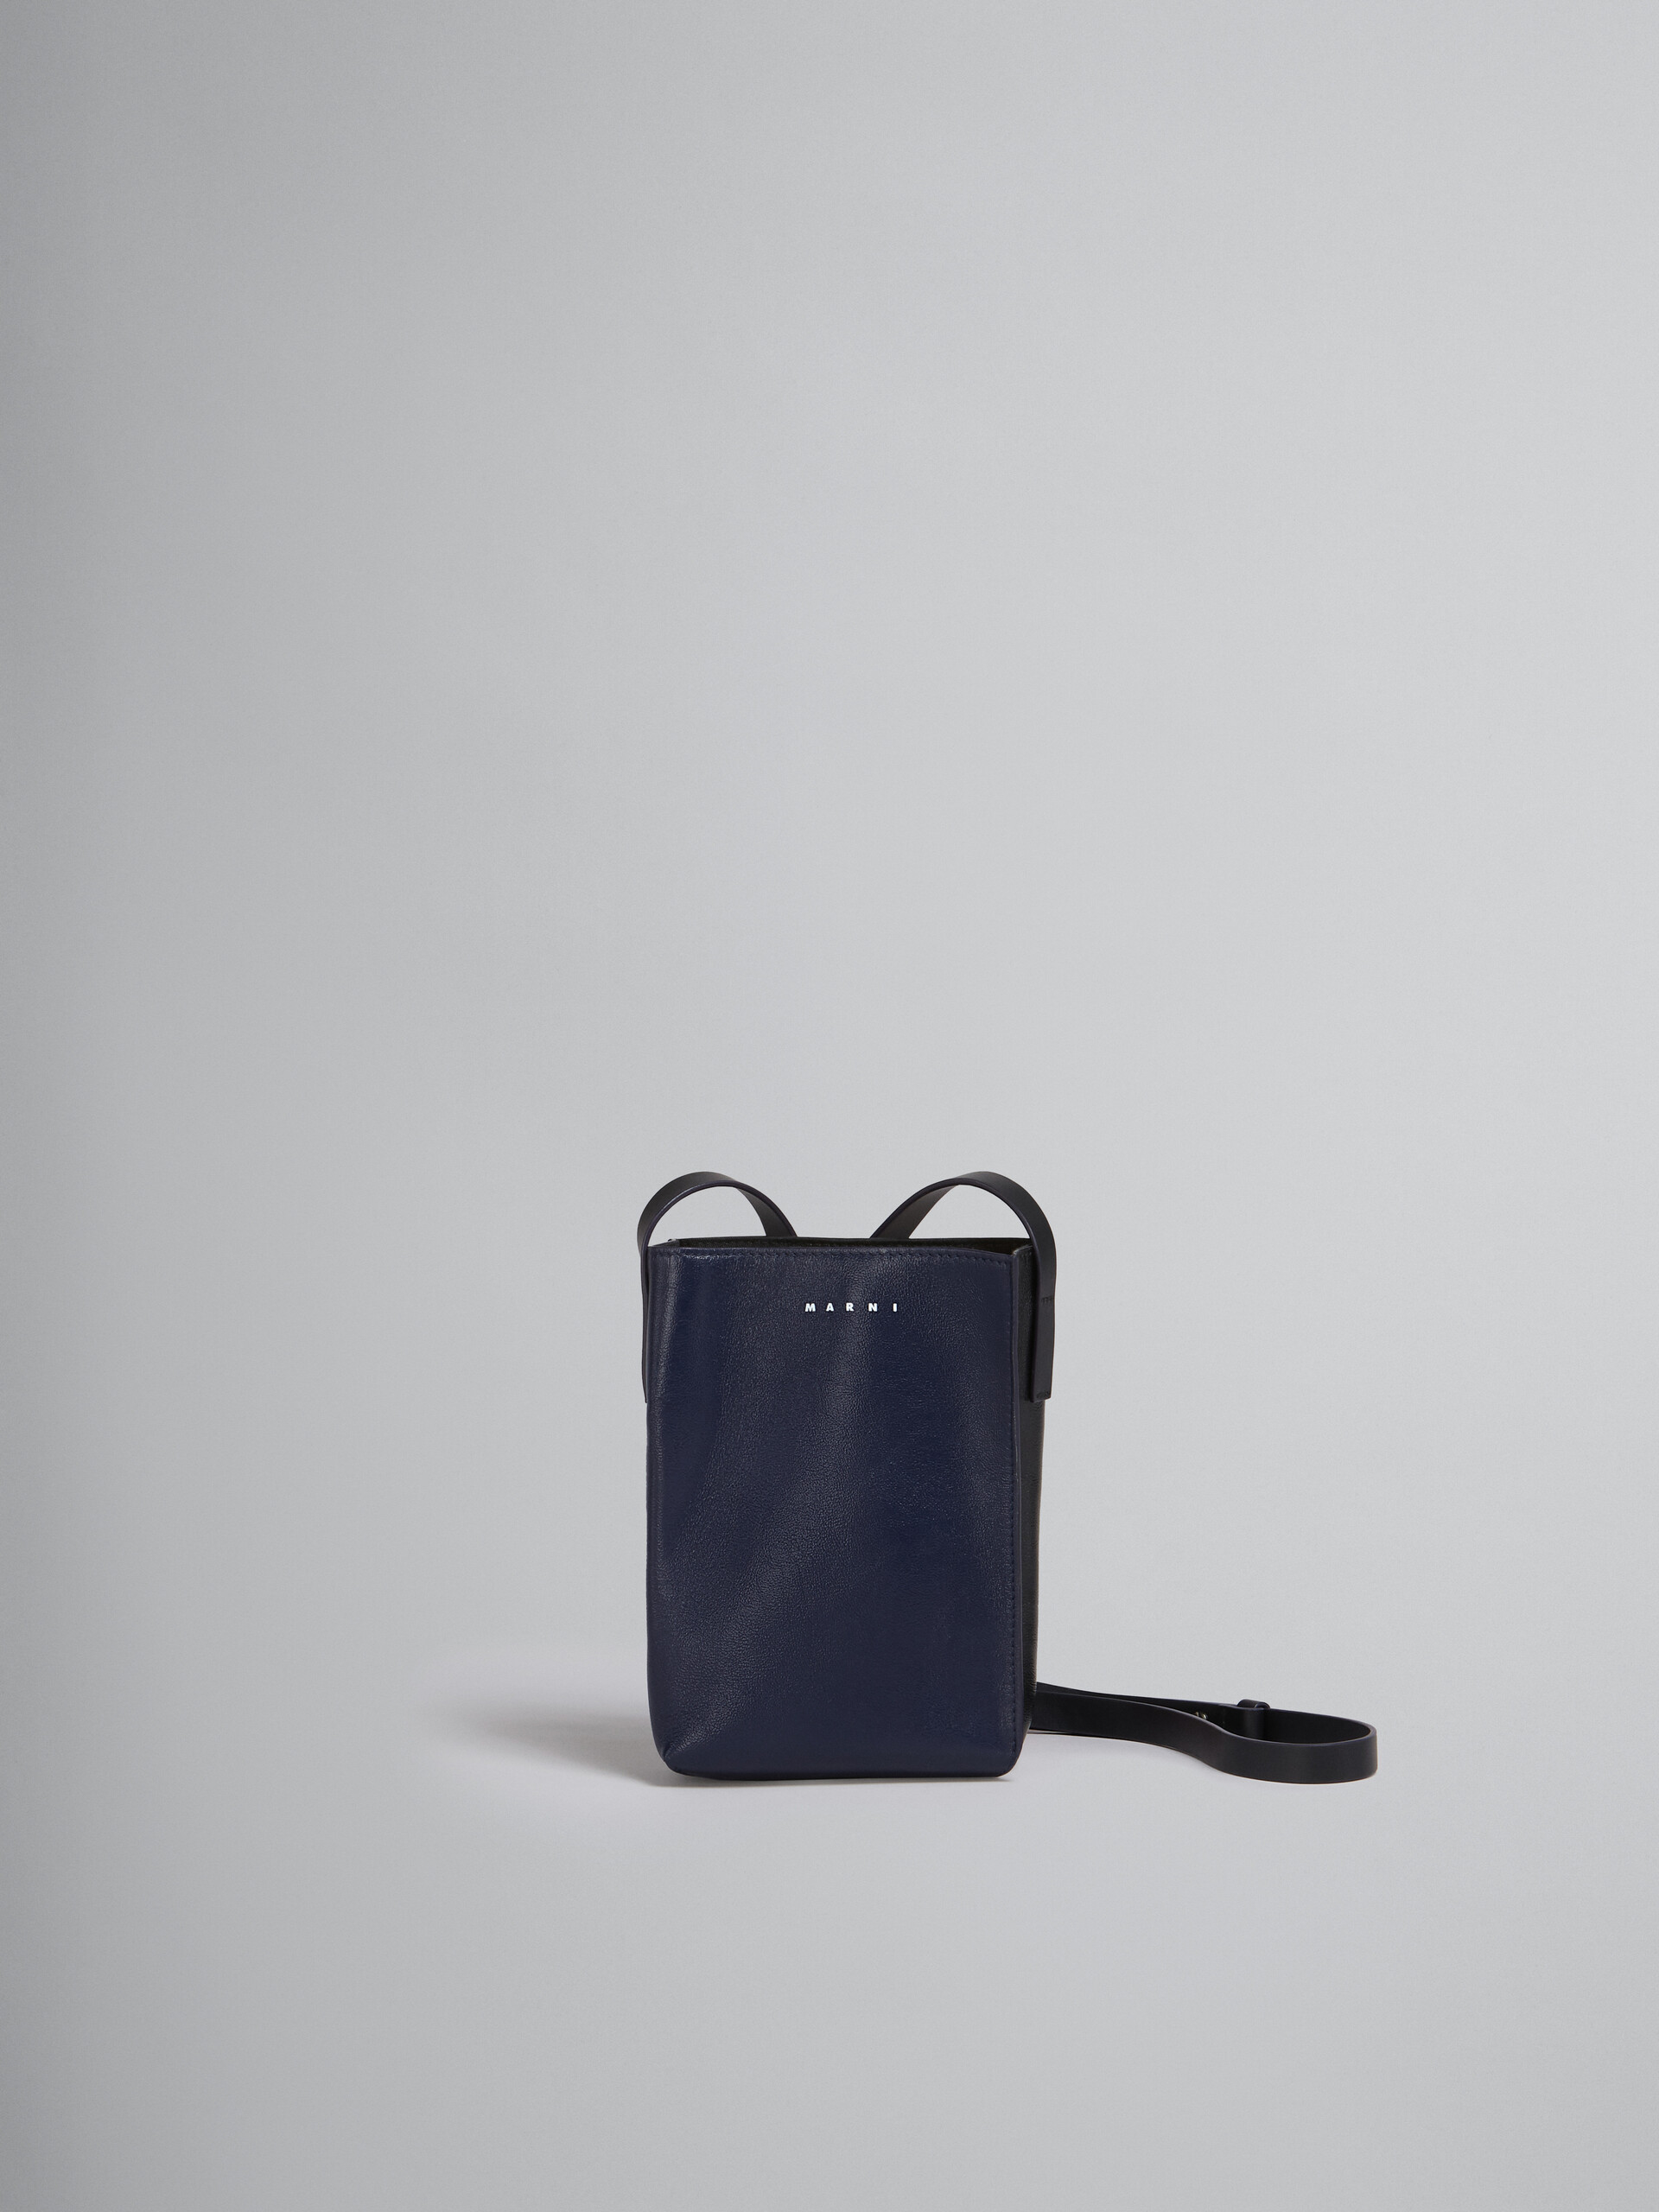 MUSEO SOFT small bag in blue and black shiny leather - Shoulder Bag - Image 1